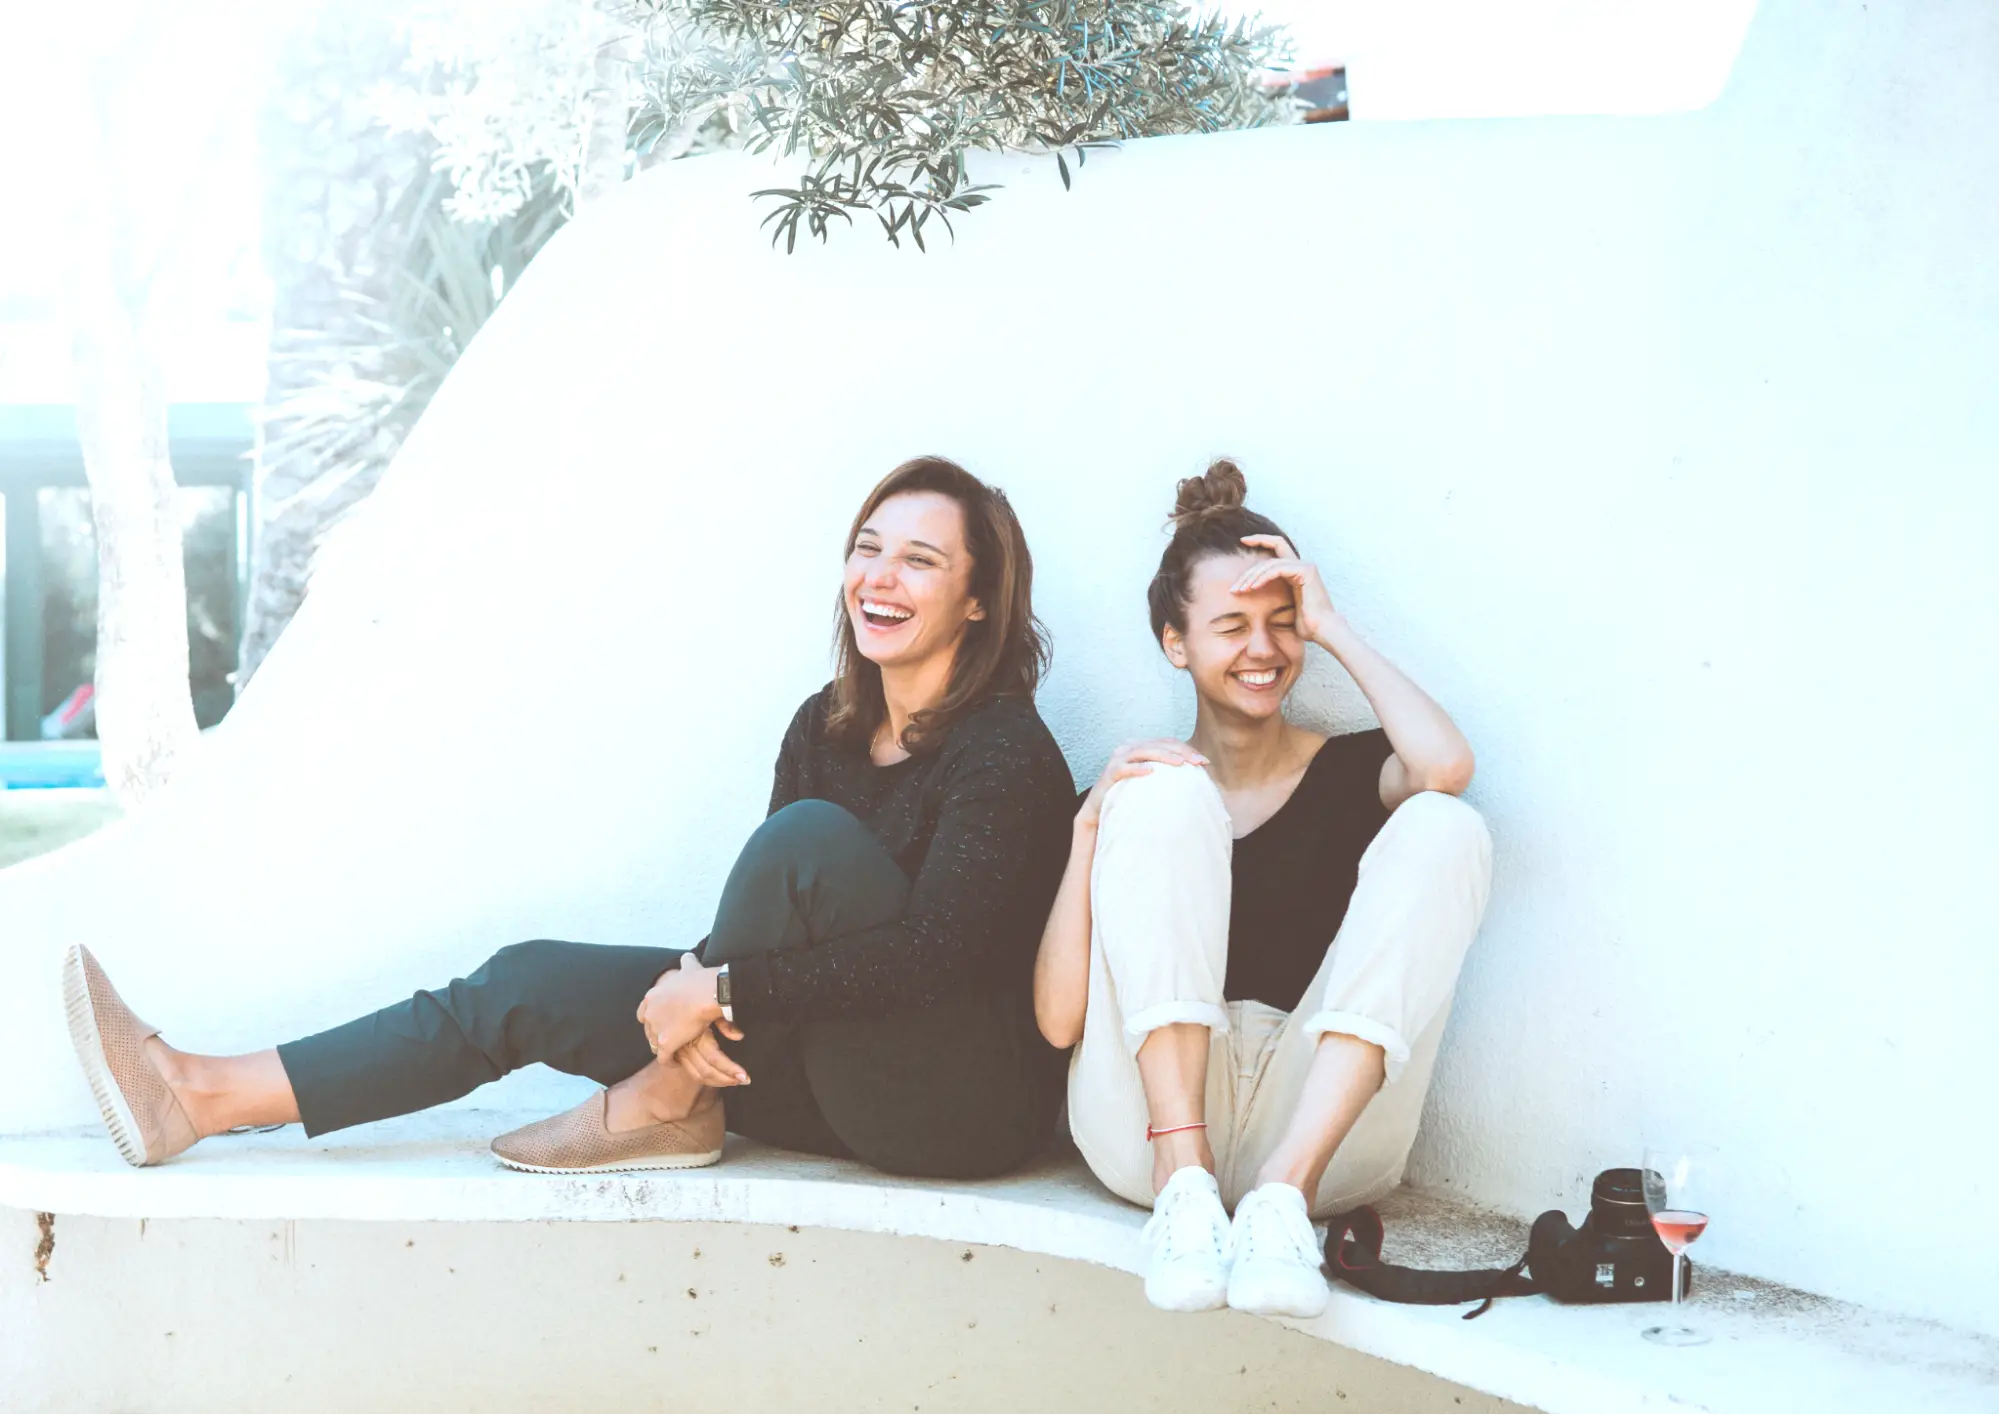 Two women sitting and laughing while practicing gratitude reflection